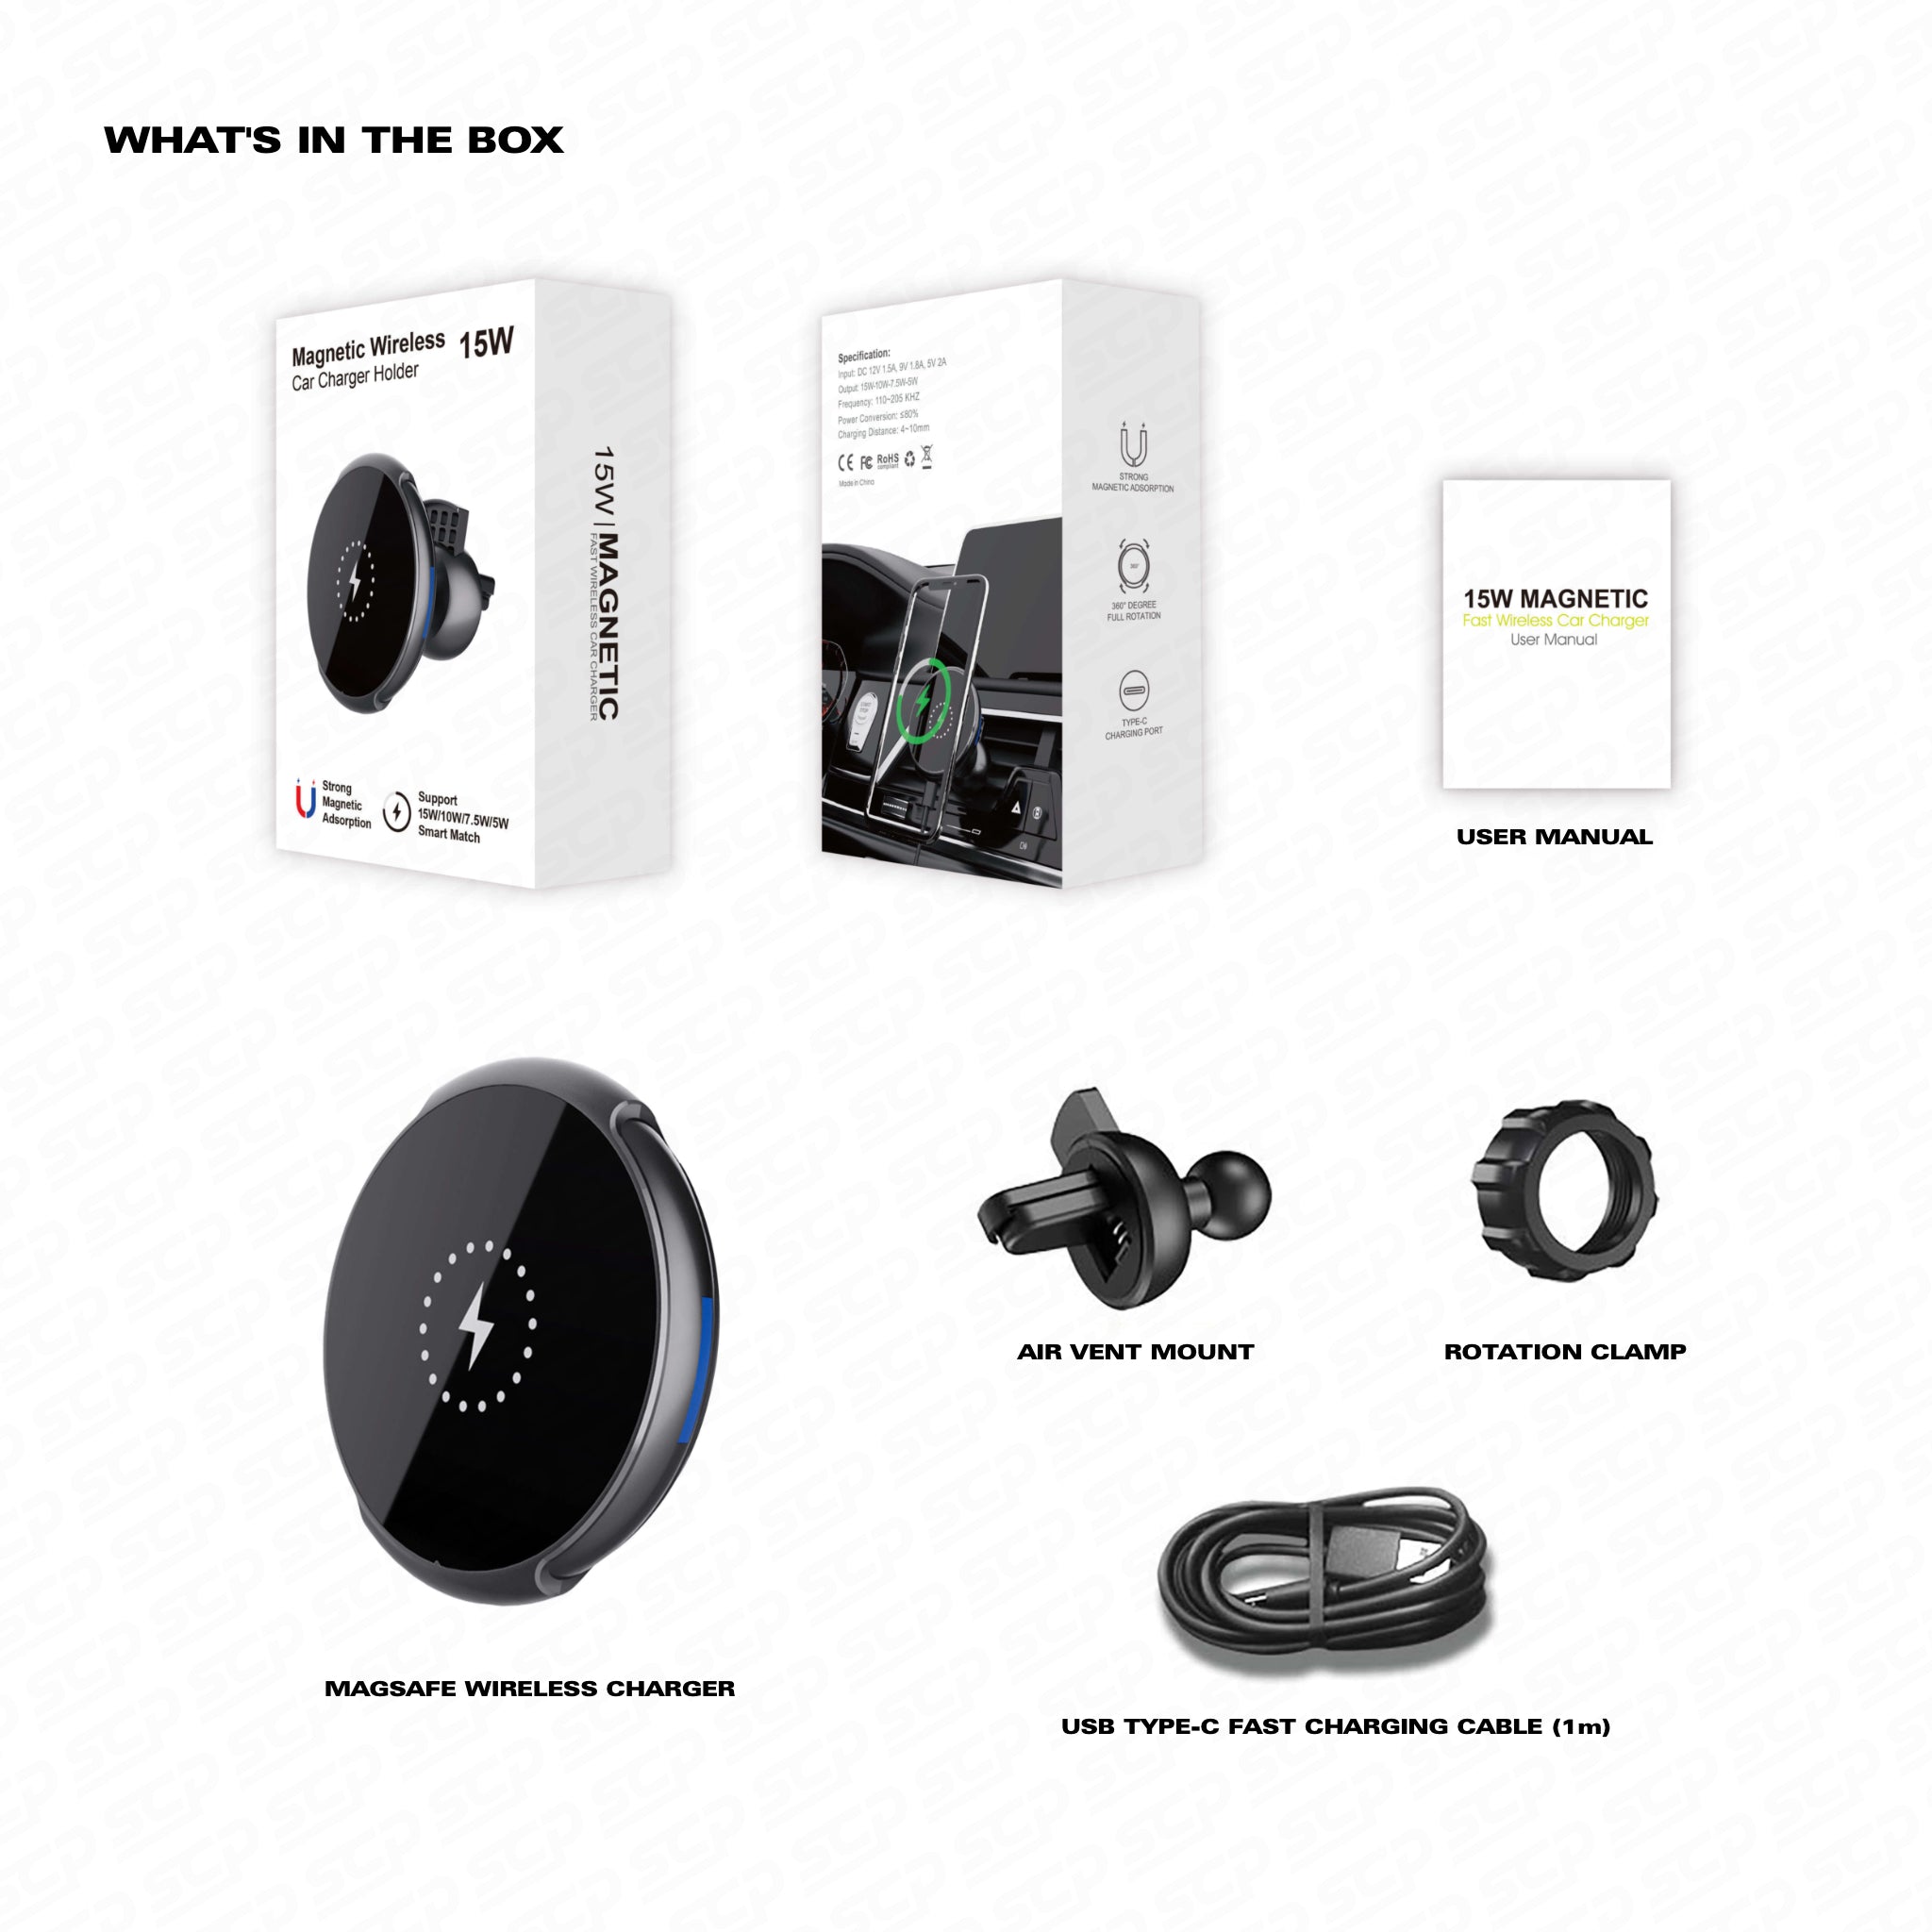 Wireless Charger Product Box